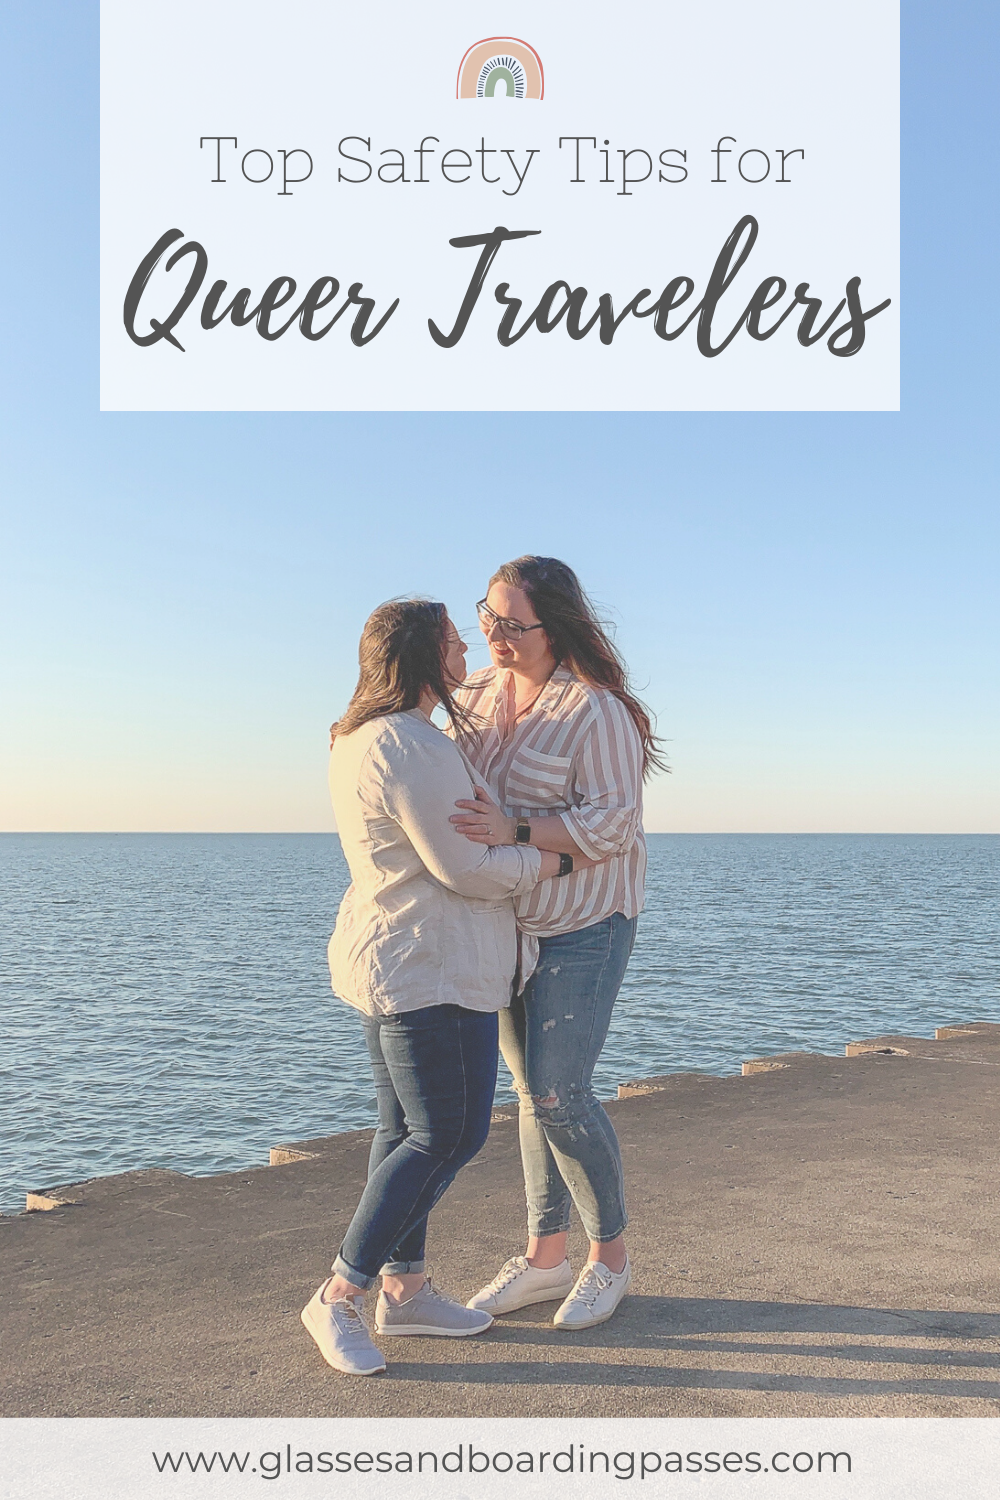 Top Safety Tips for Queer Travelers